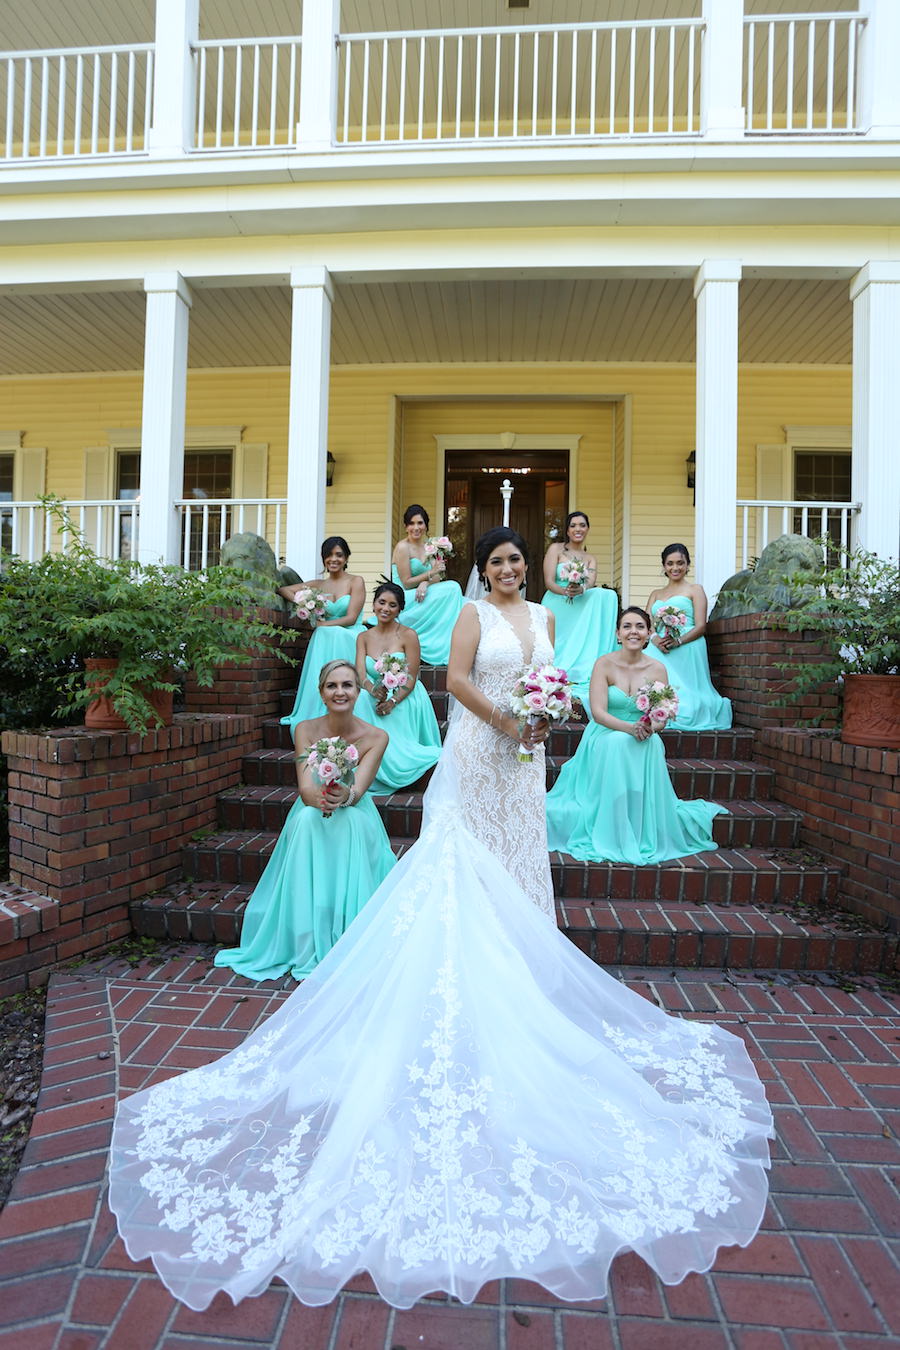 Florida Bride and Bridesmaids, Outdoor Wedding Portraits in Lace Wedding Dress with Long Train and Mint Green Bridesmaids Dresses